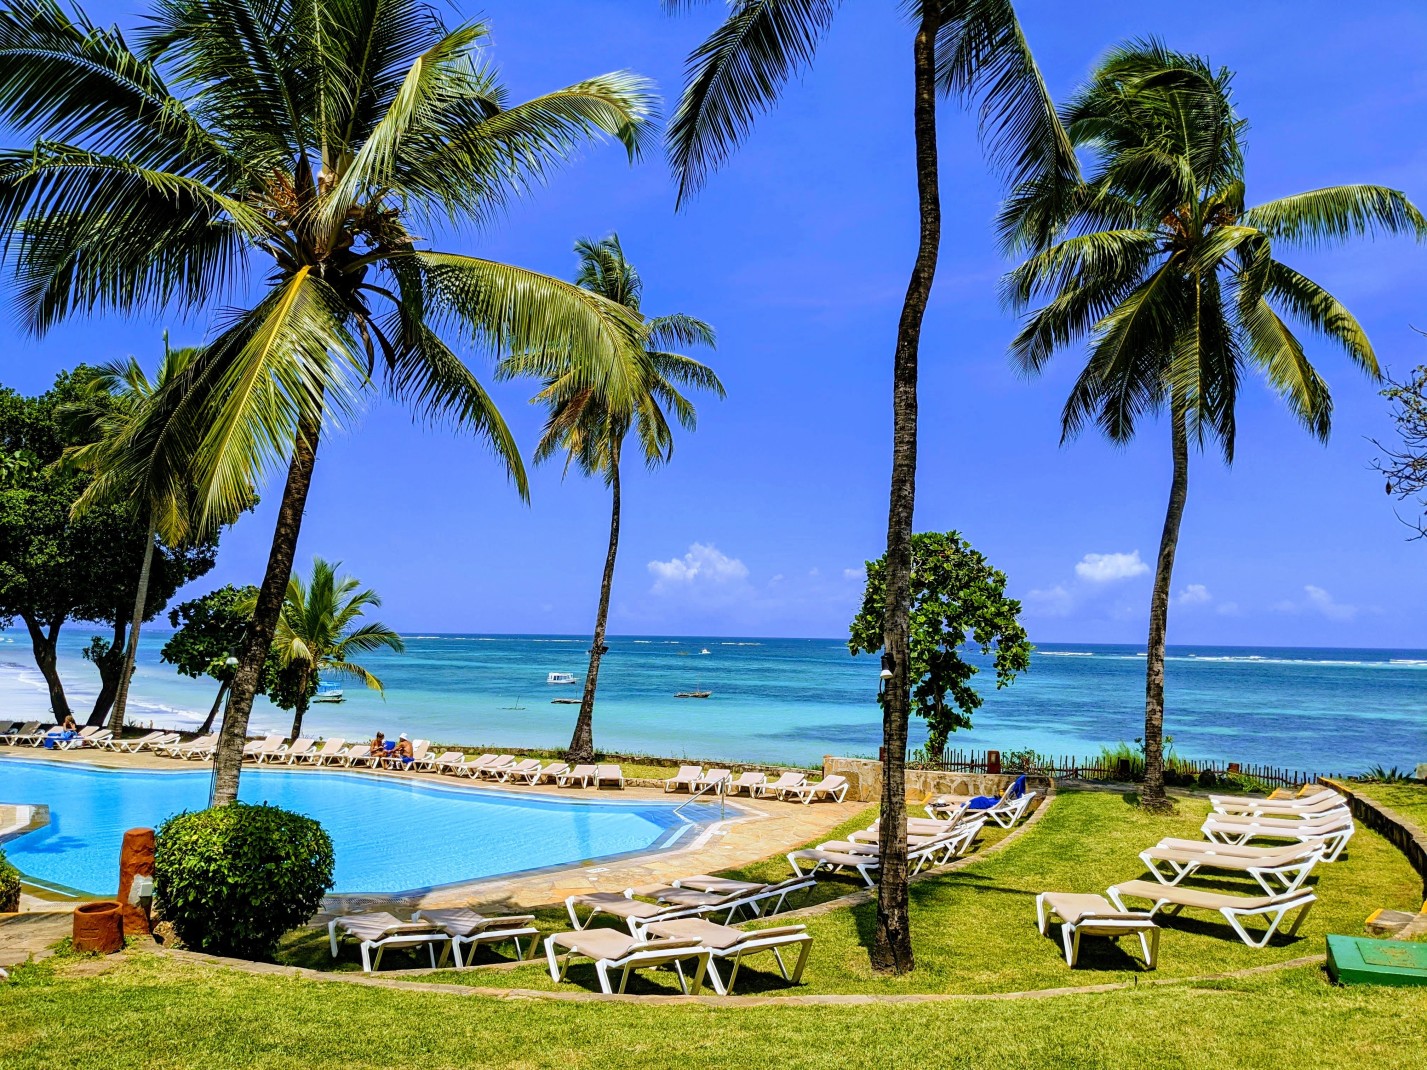 Lounge chairs and palm trees surrounding a pool next to the ocean on a sunny day in Kenya